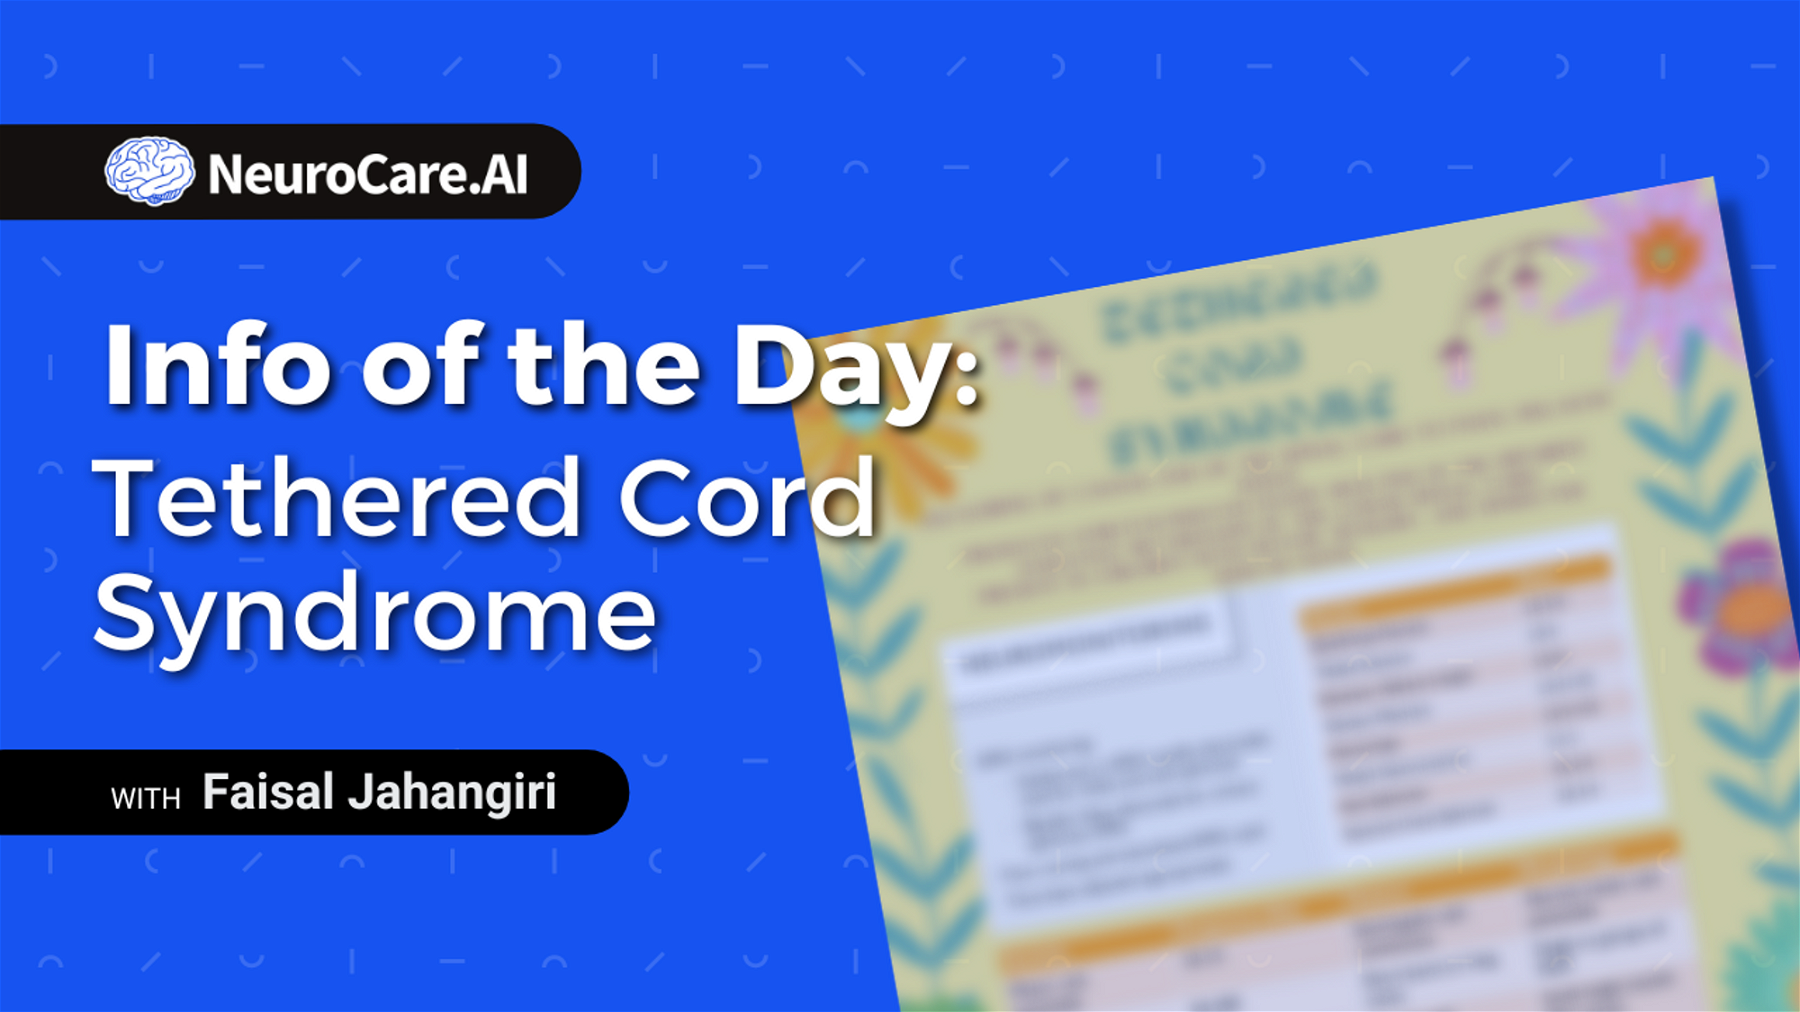 Info of the Day: "Tethered Cord Syndrome"